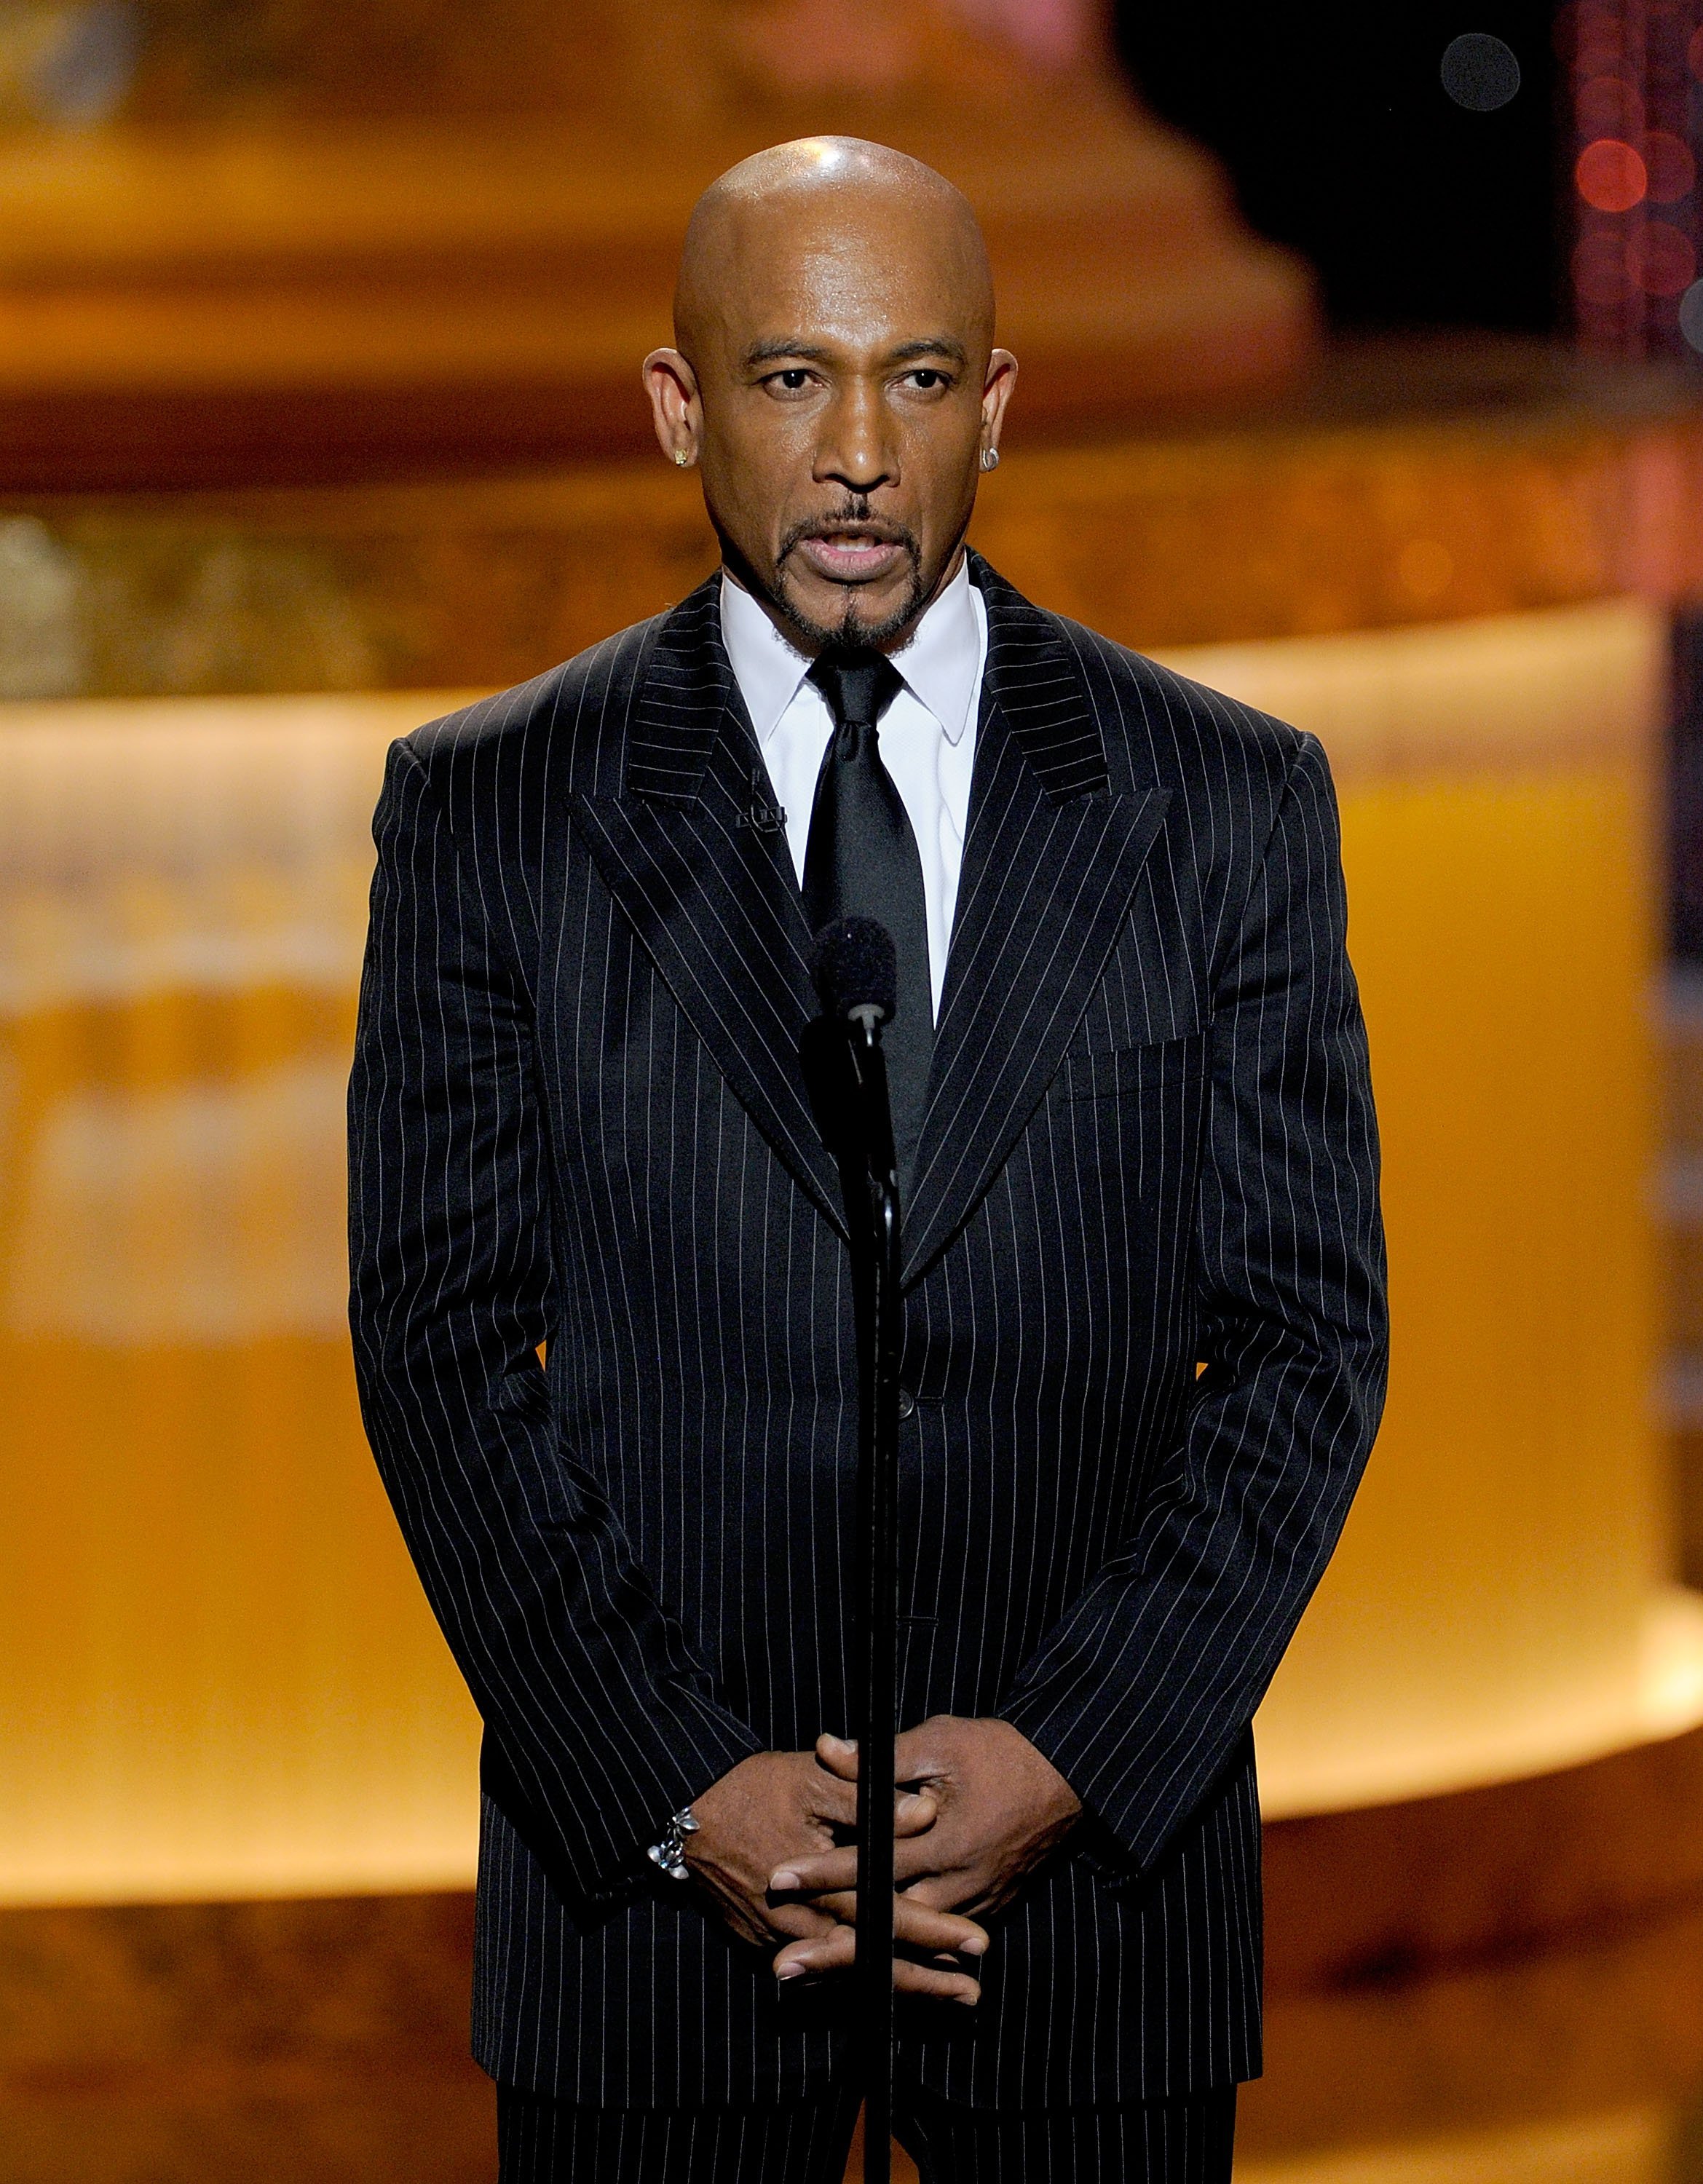 Montel Williams on June 27, 2010 in Las Vegas, Nevada | Photo: Getty Images